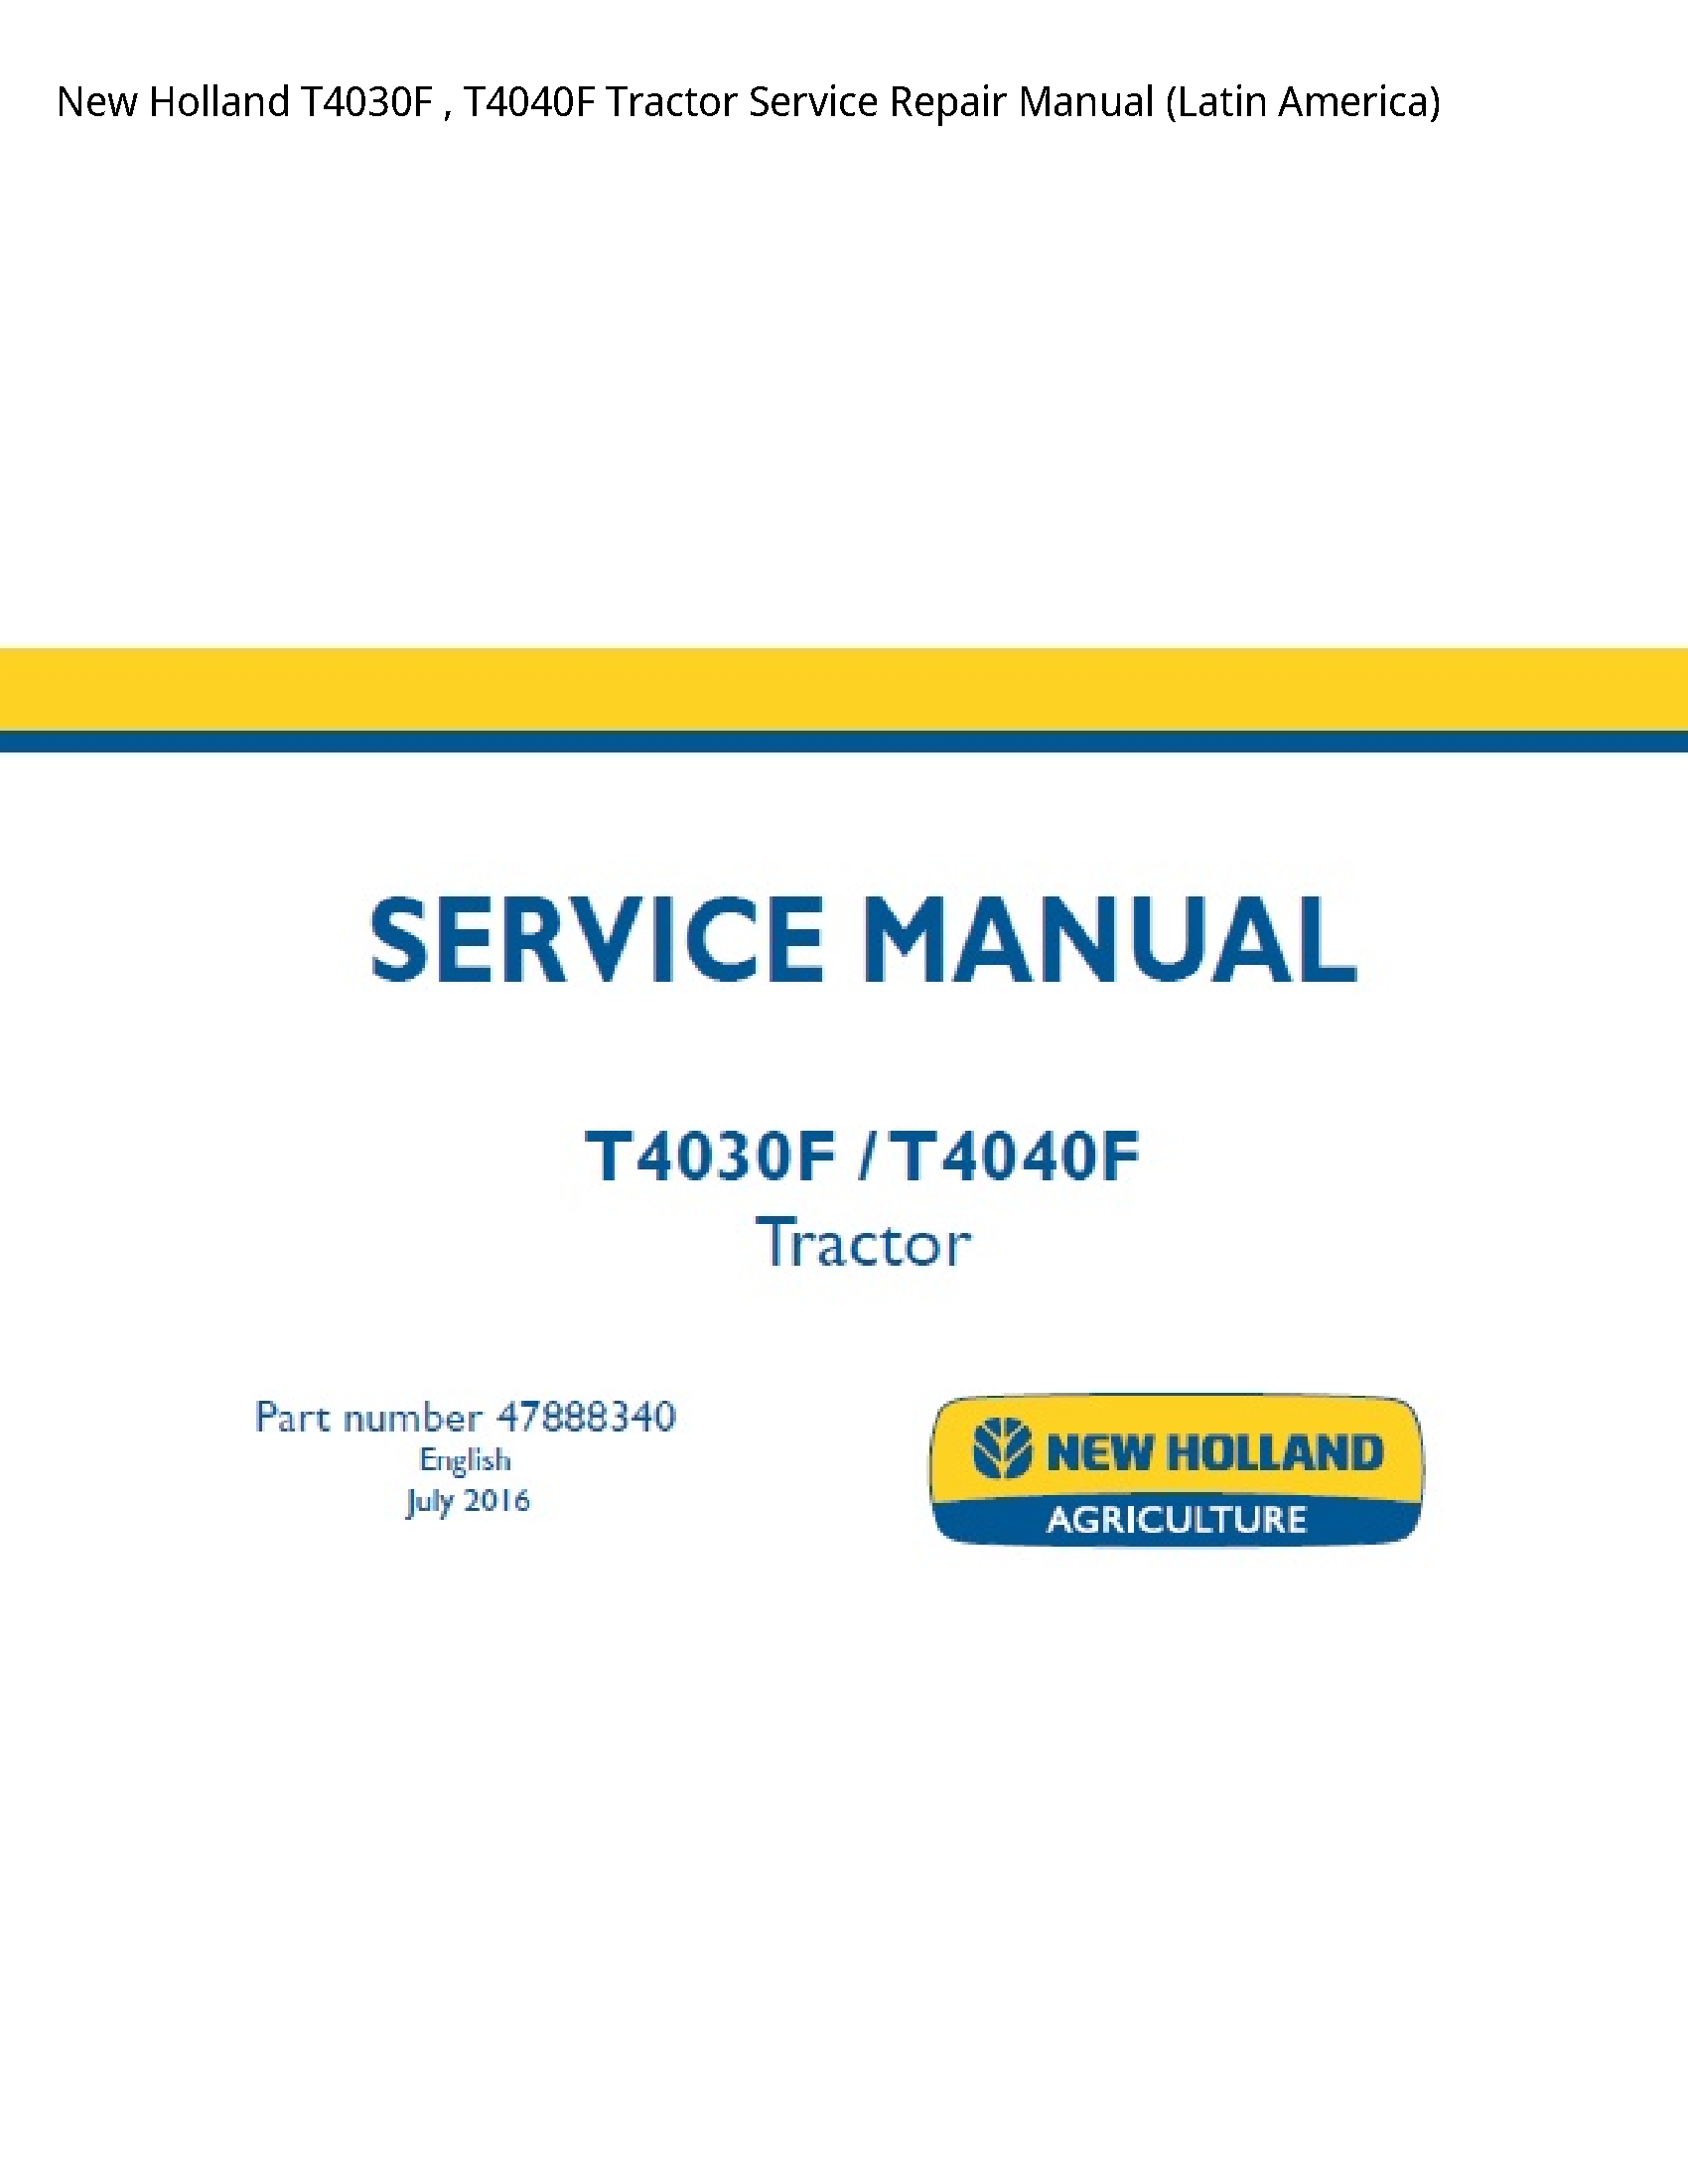 New Holland T4030F Tractor manual